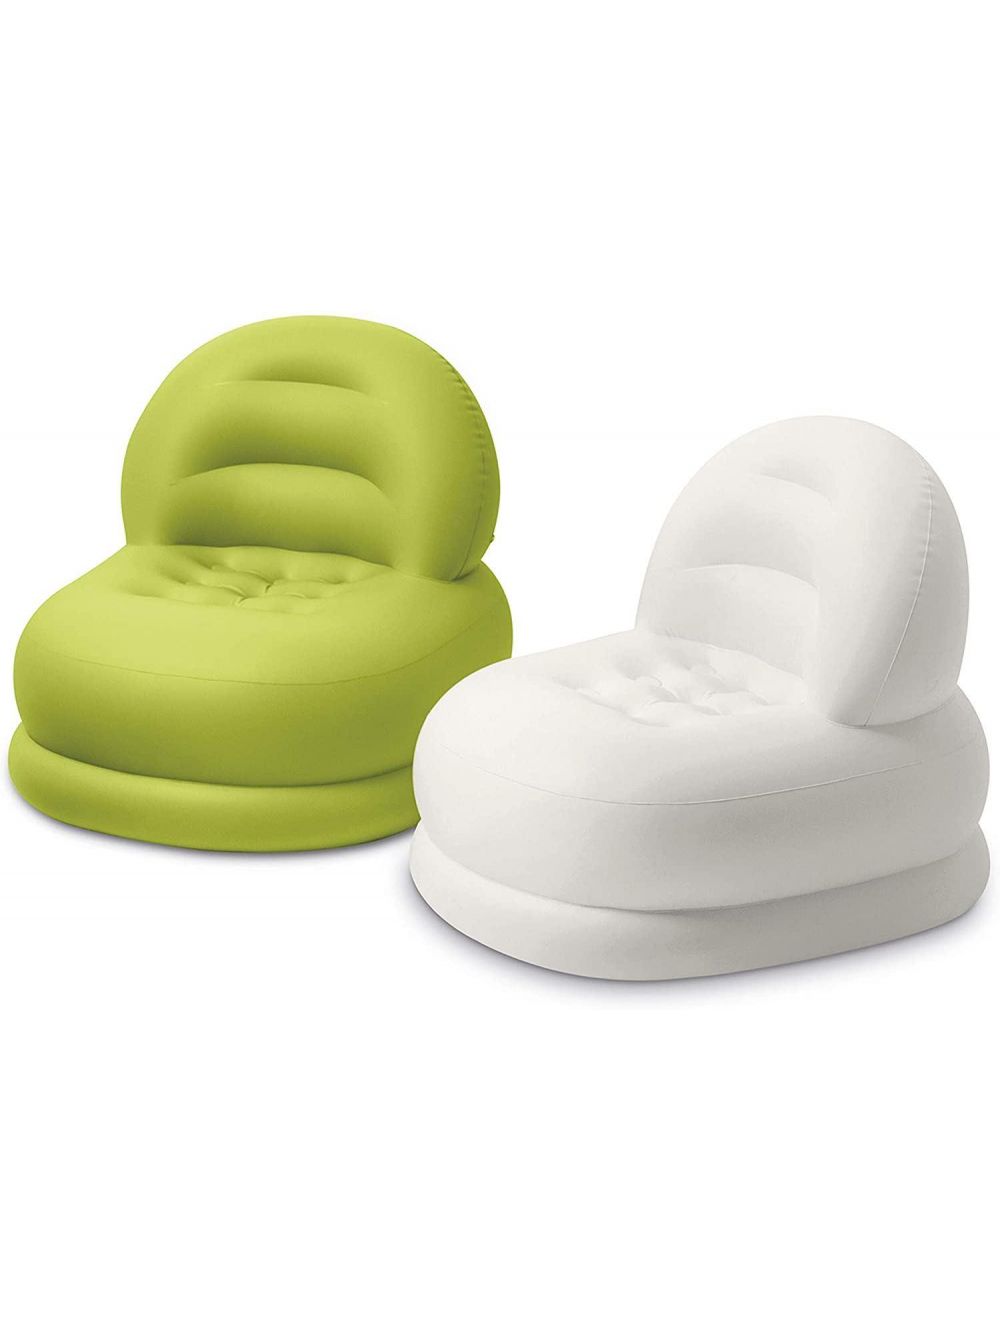 Unibos Unisex Children Adults Inflatable One Person Sofa Chair Lounger Seat Assorted 